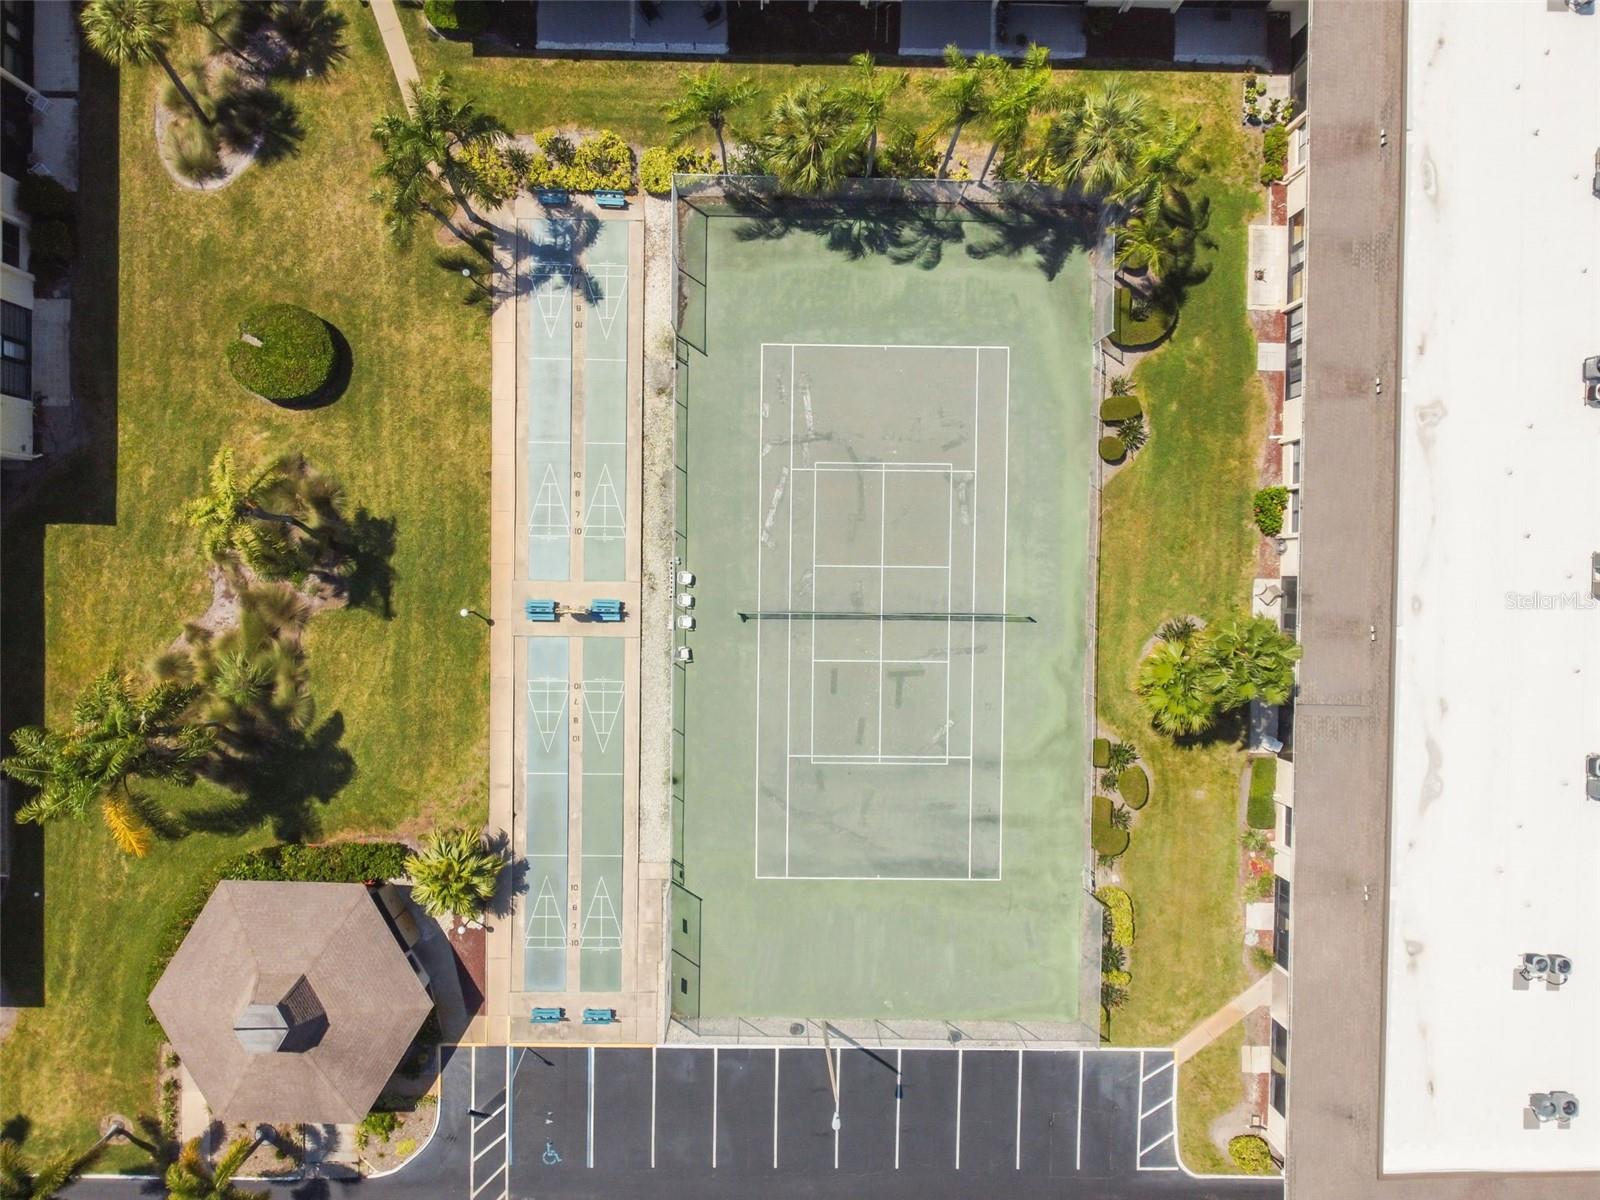 Tennis, Pickle Ball, and Shuffleboard Courts